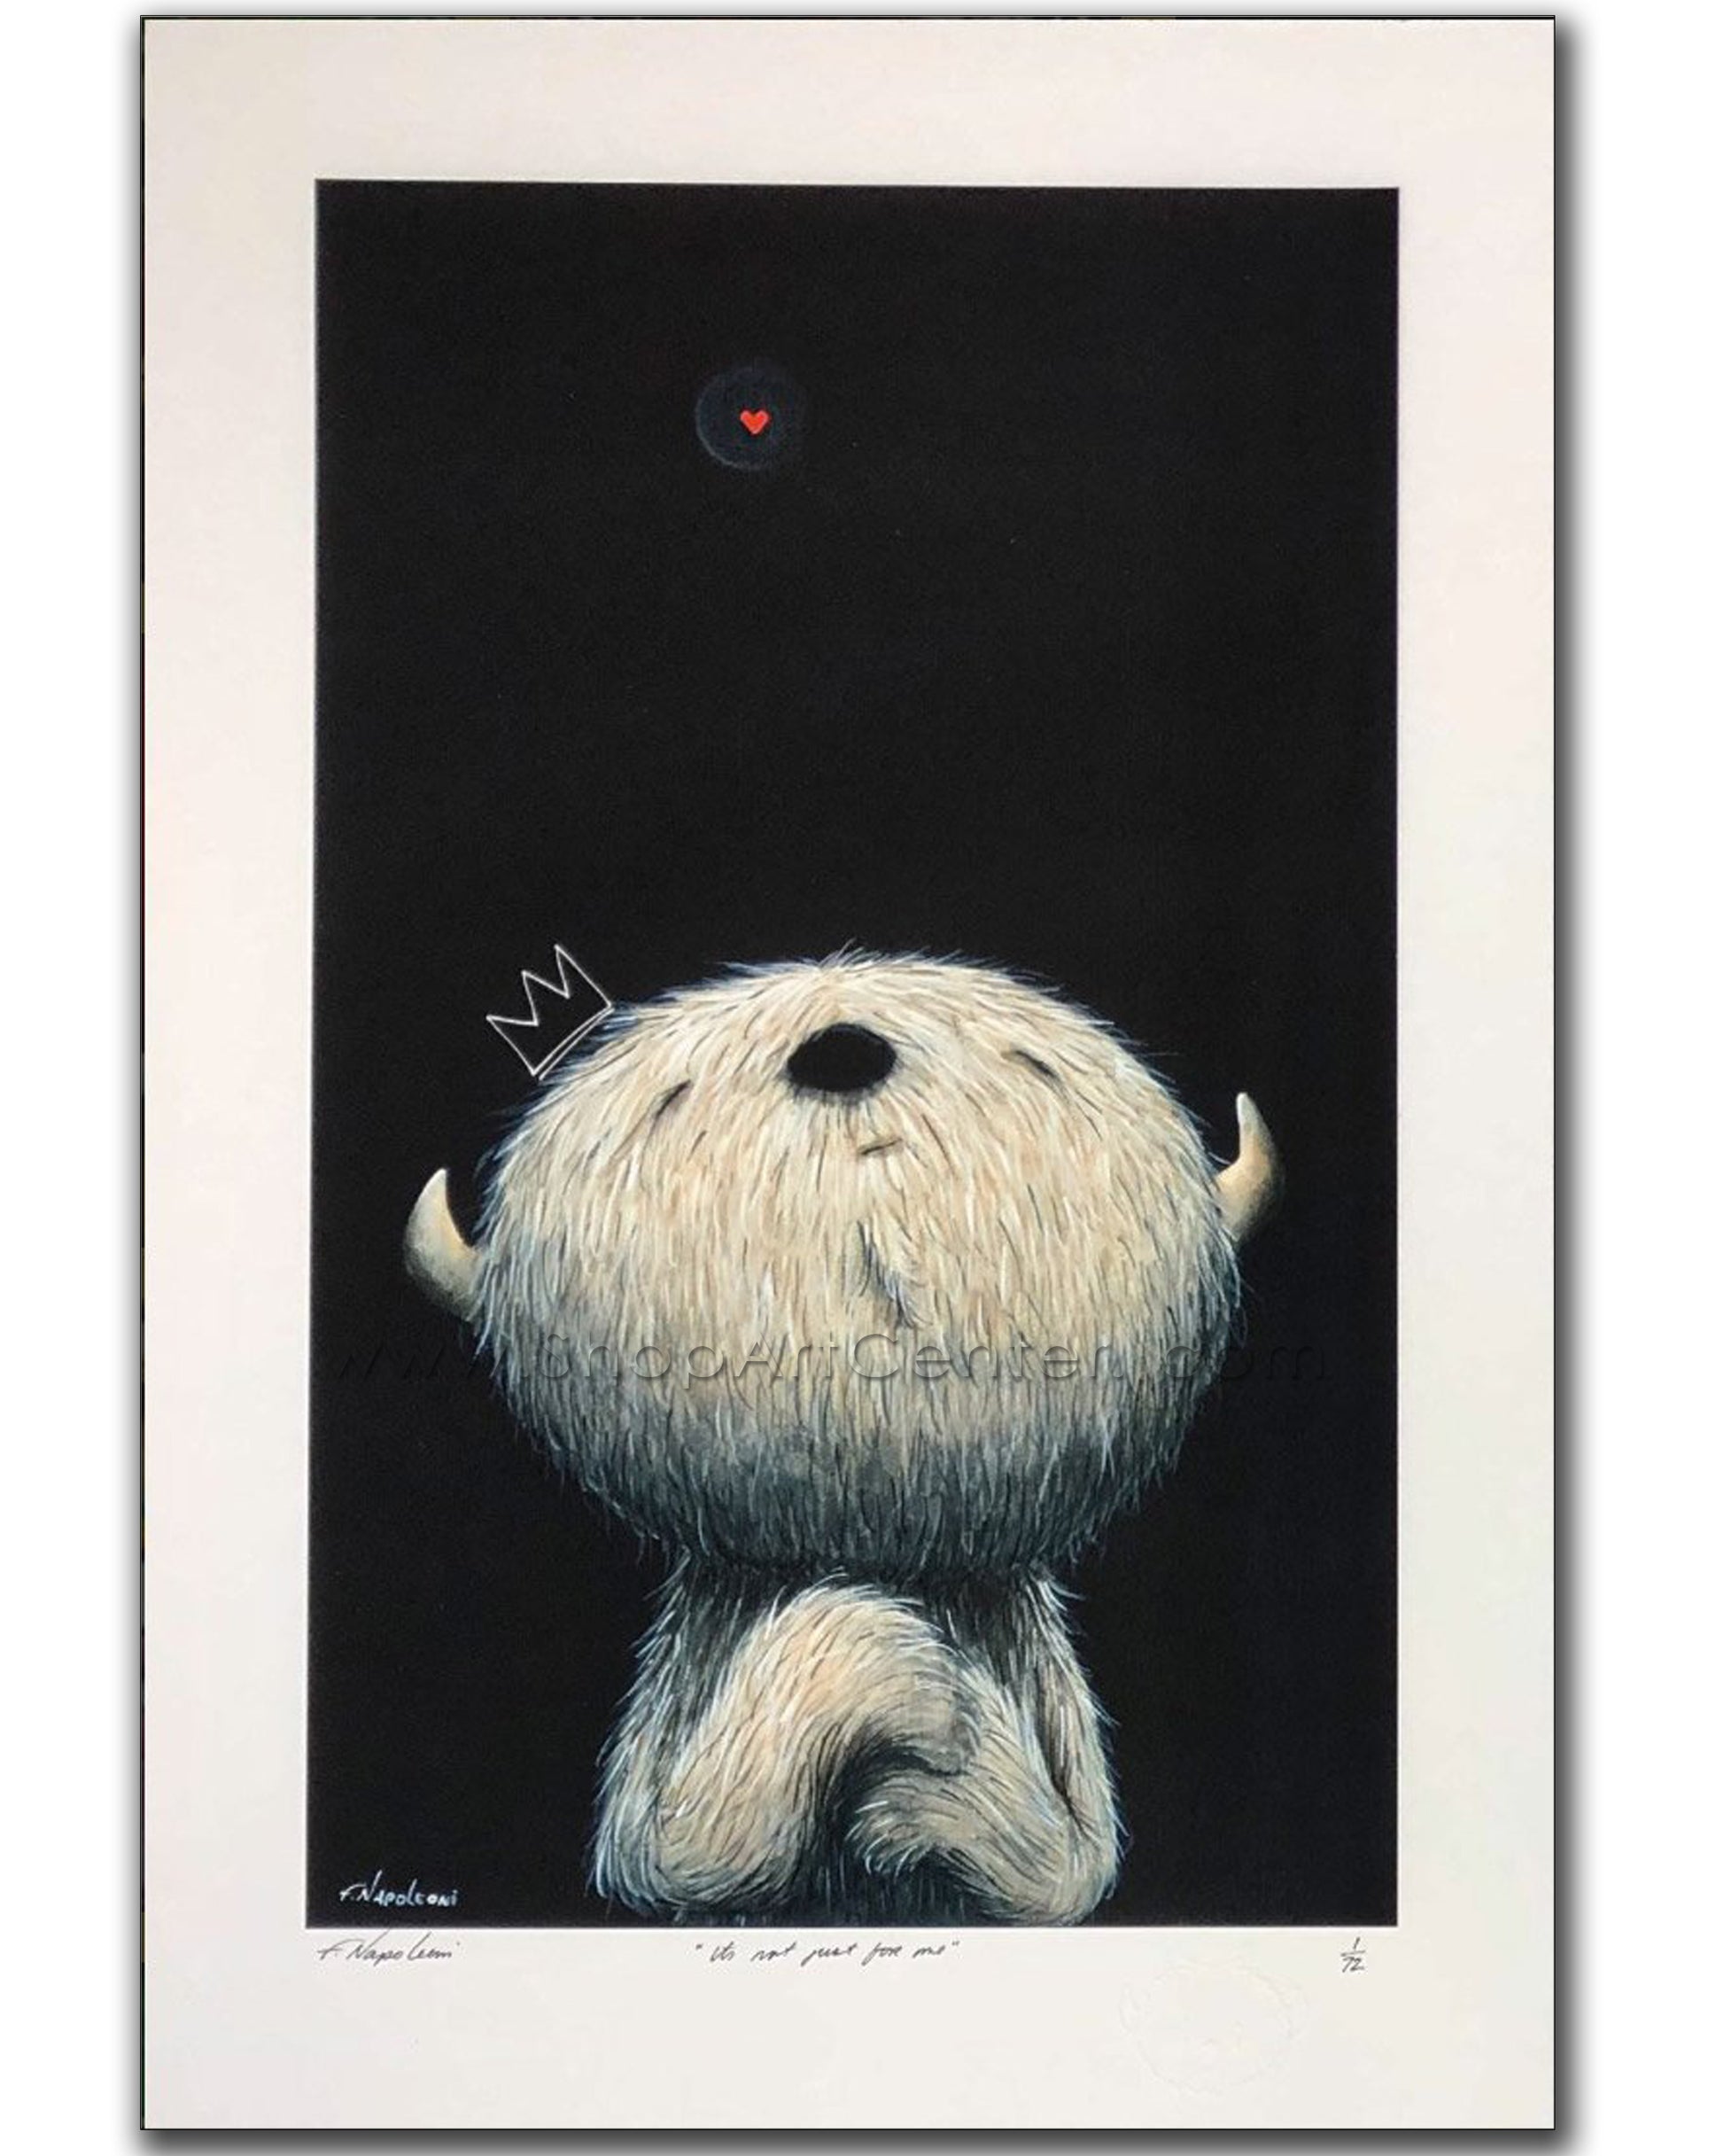 Fabio Napoleoni "It's Not Just for Me" Limited Edition Paper Giclee